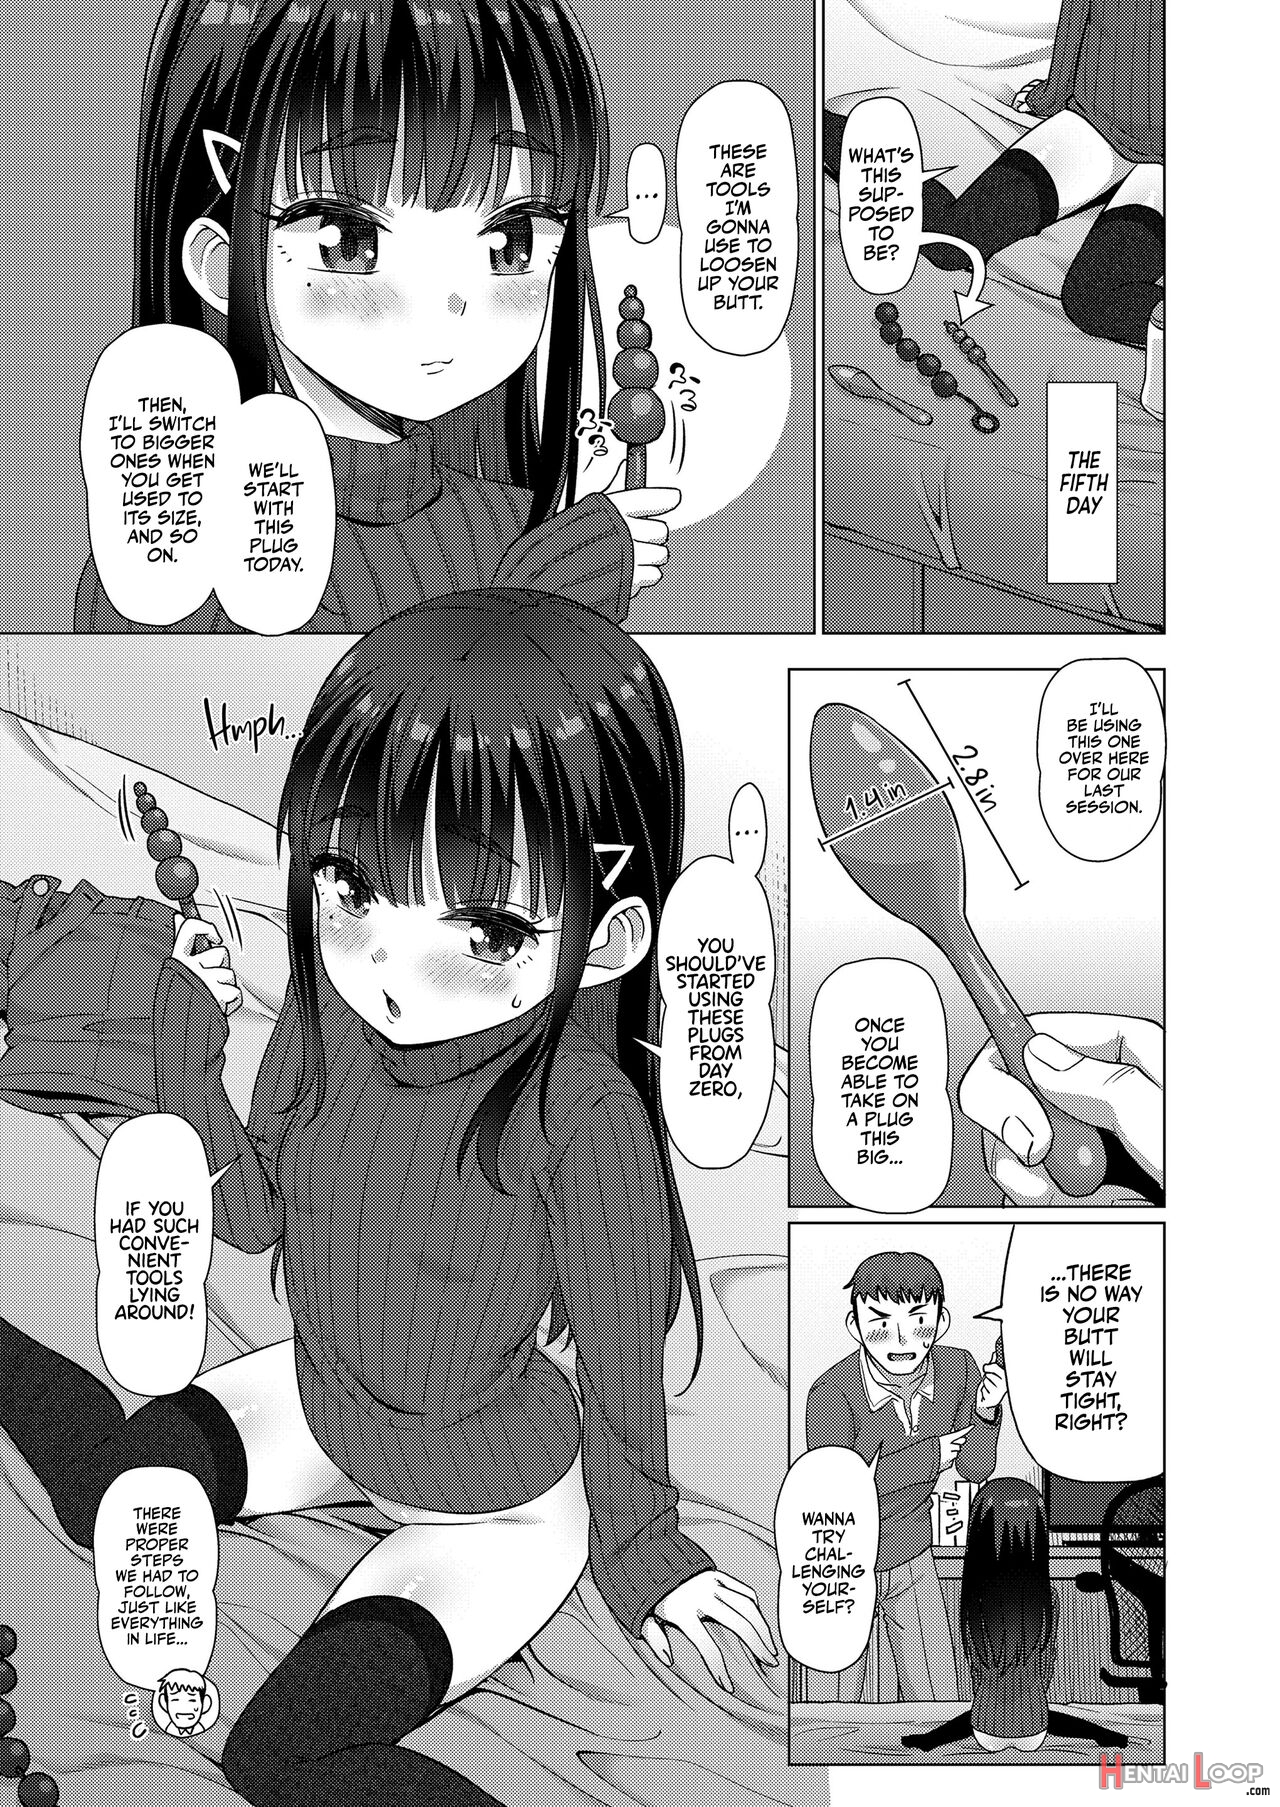 Help Me, Onii-chan! page 9